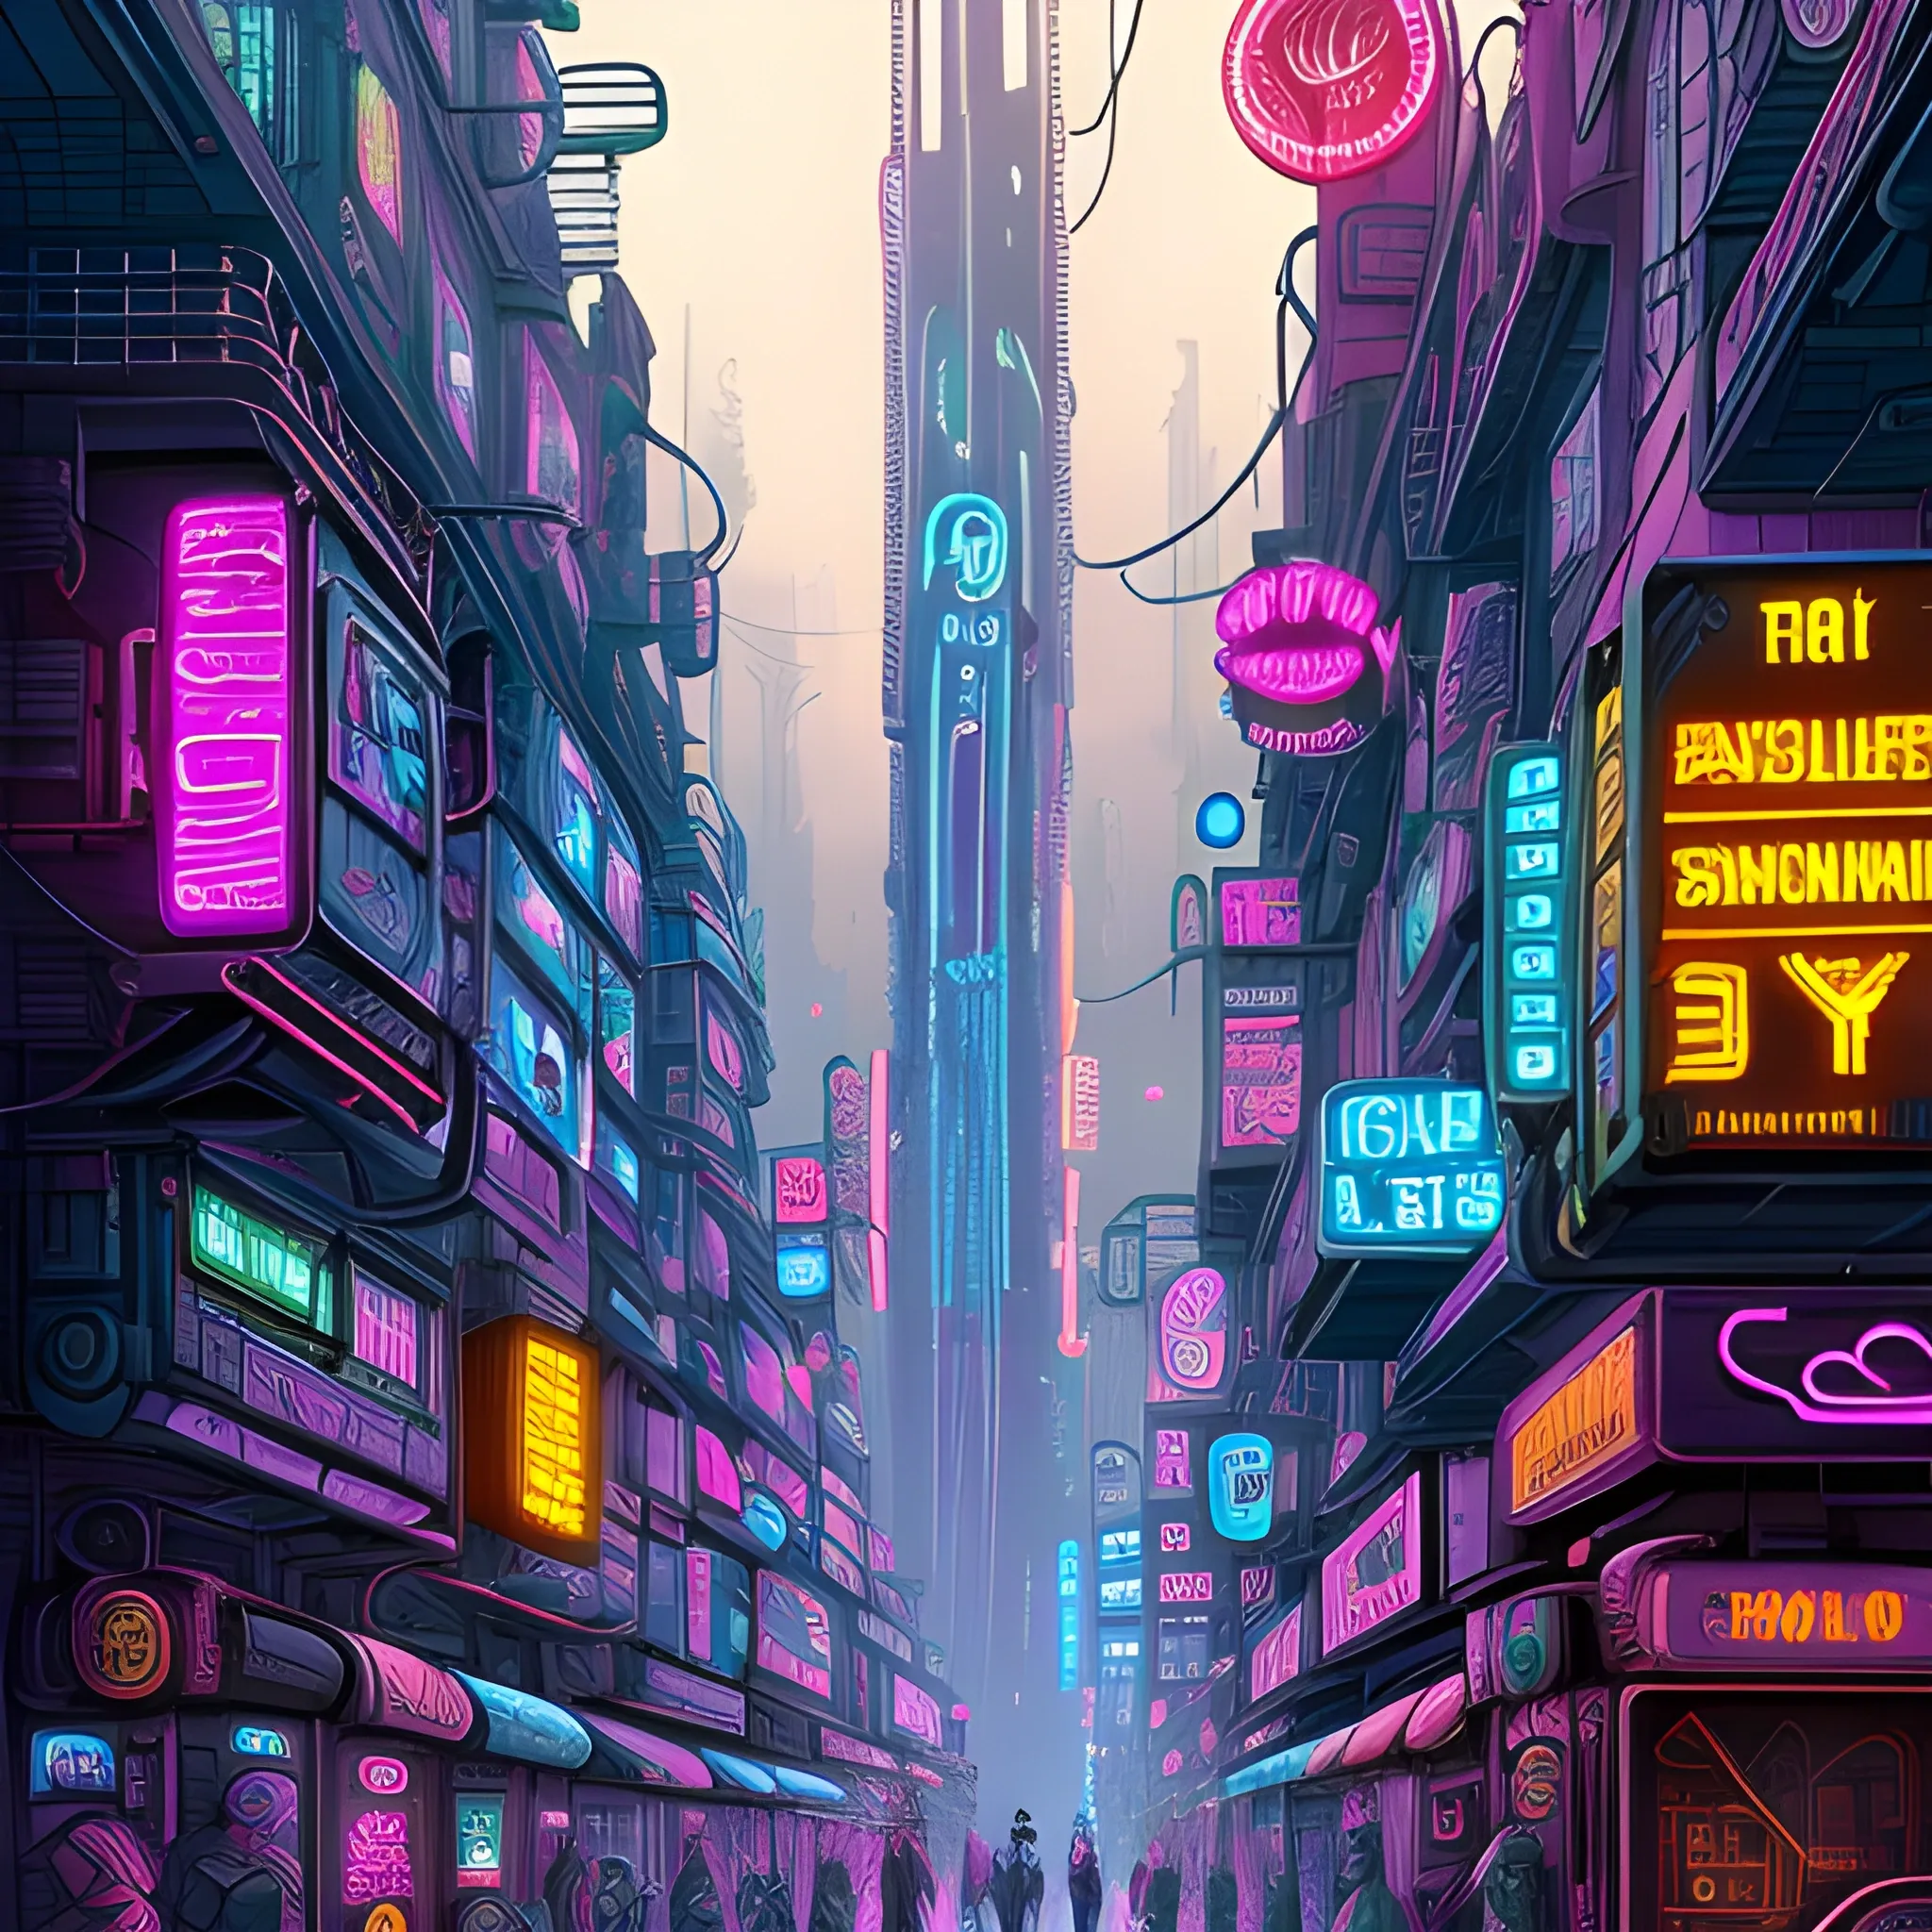 Create a 9:16 art piece depicting a bustling cyberpunk city with diverse, colorful cyborgs. Blend steampunk and cyberpunk elements, incorporating vibrant colors, neon lights, and intricate machinery.